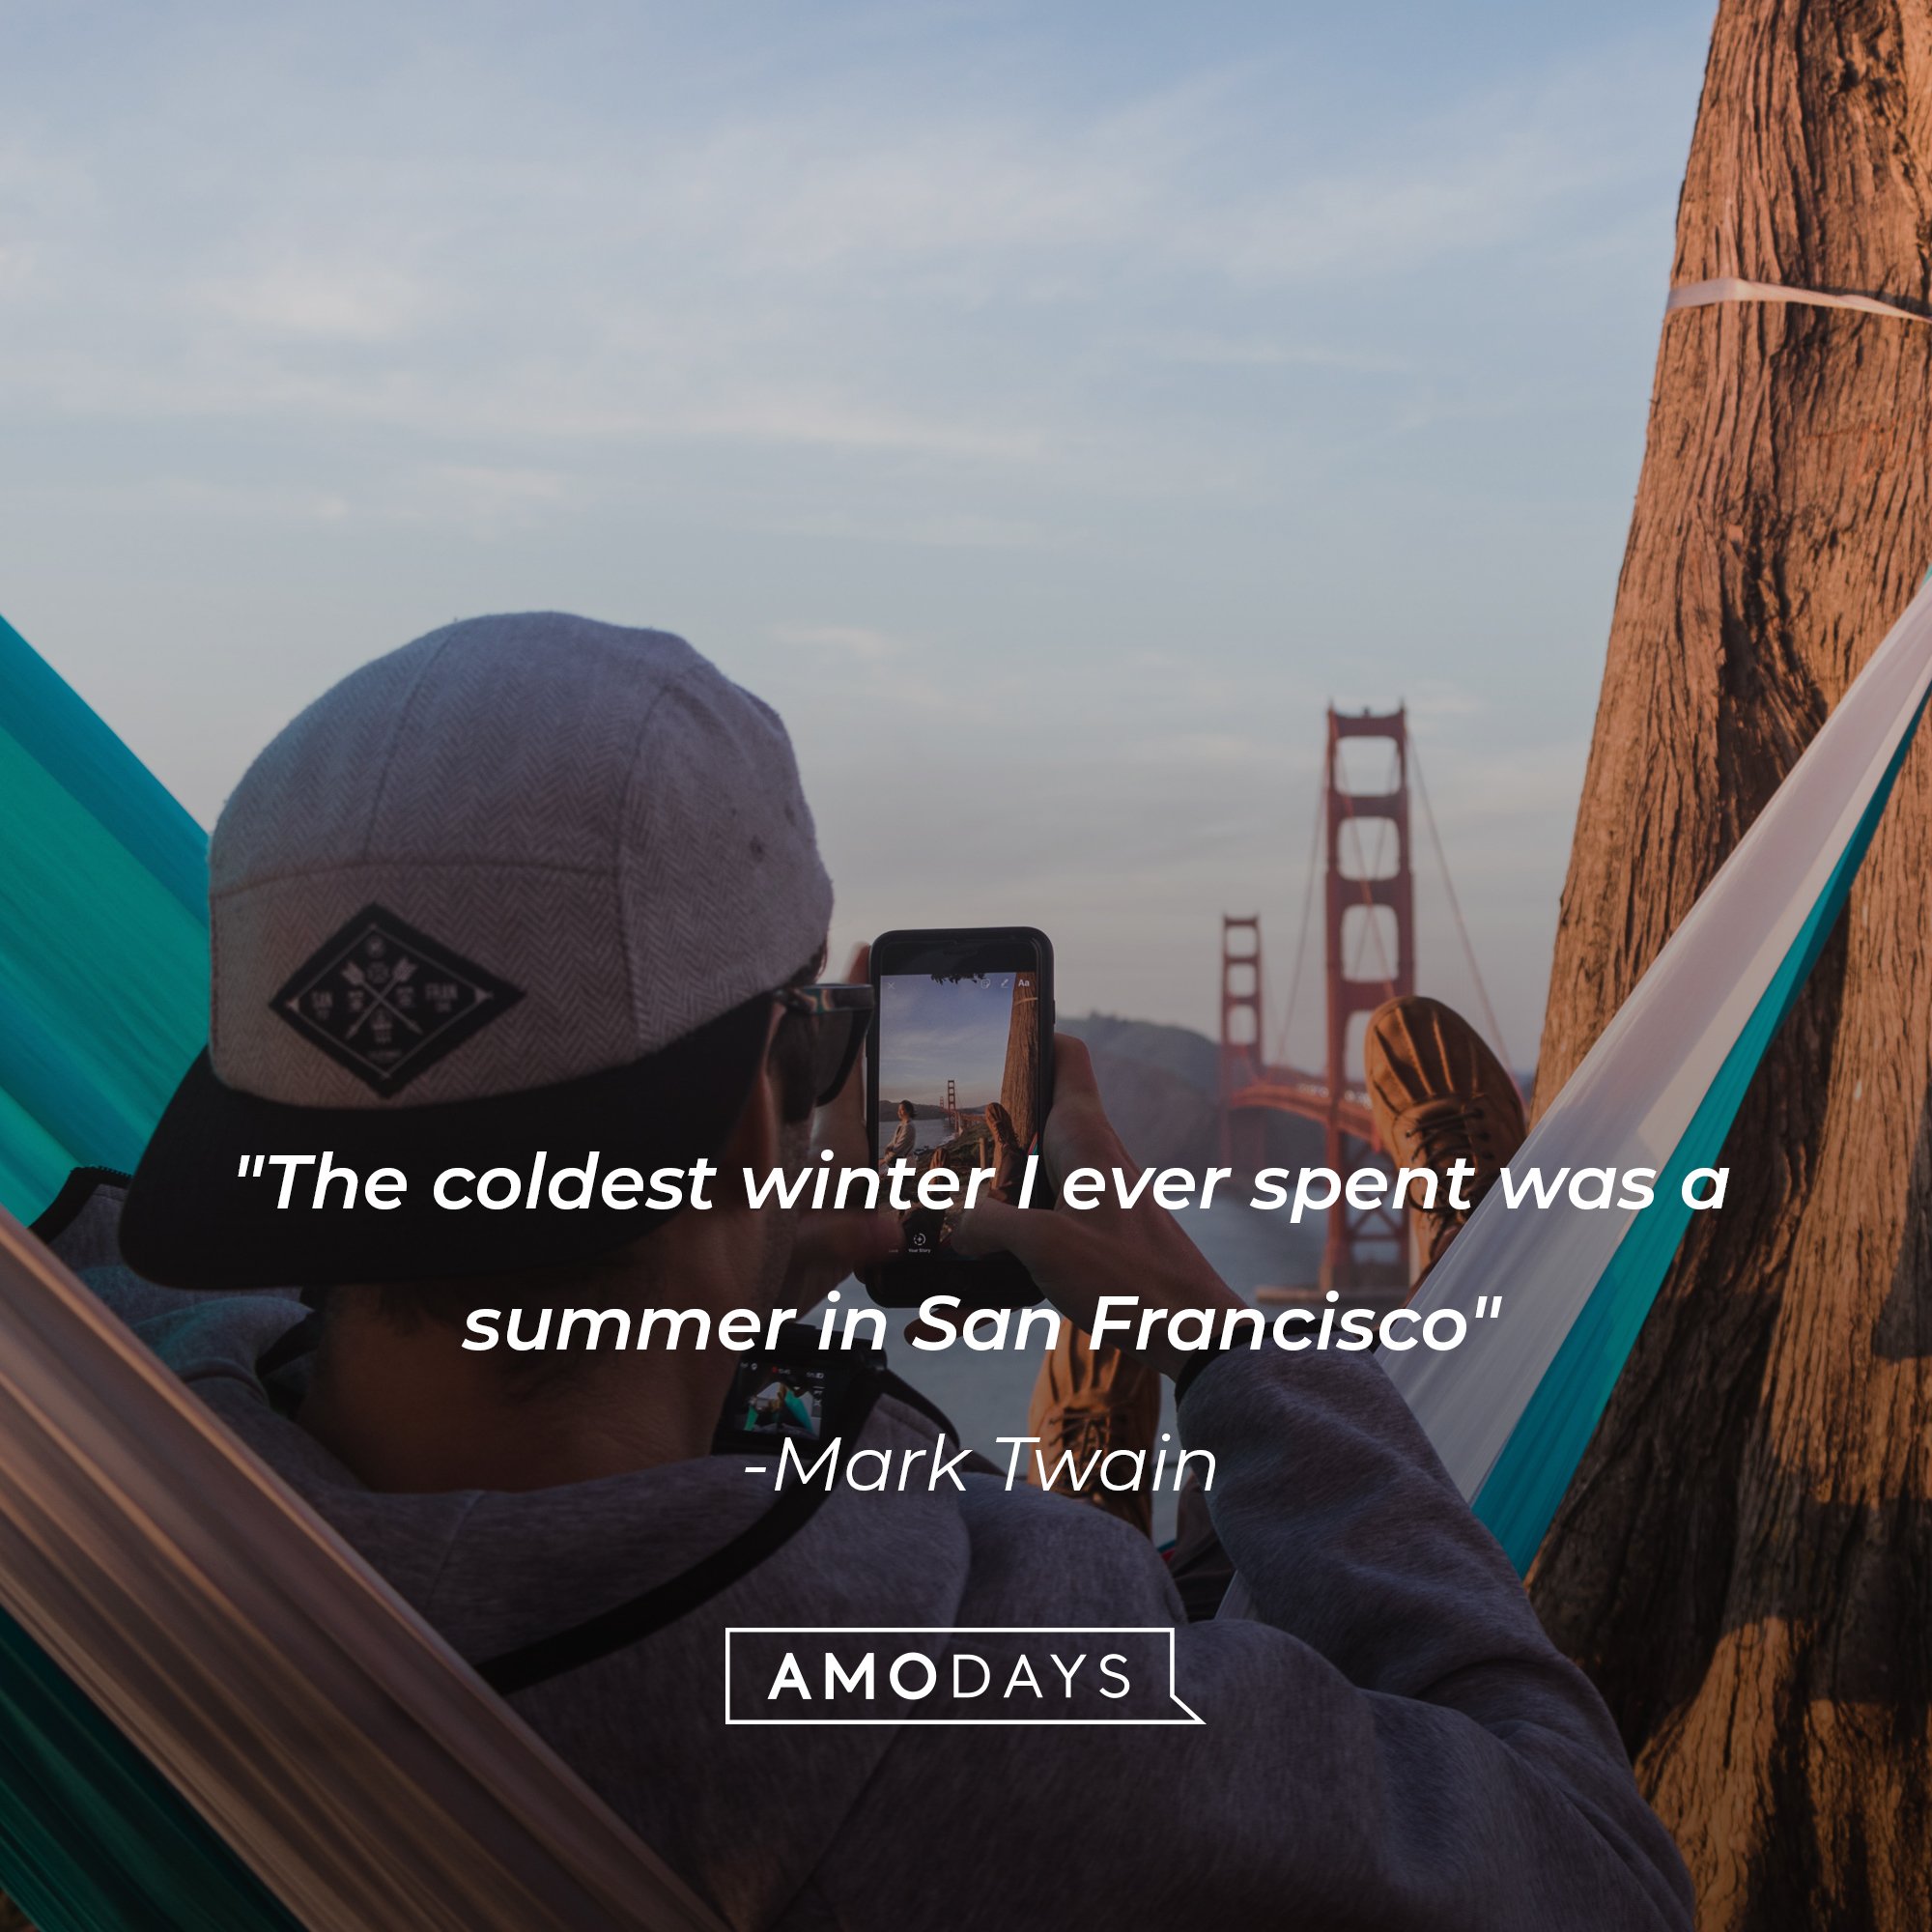  Mark Twain’s quote: "The coldest winter I ever spent was a summer in San Francisco."  | Image: AmoDays